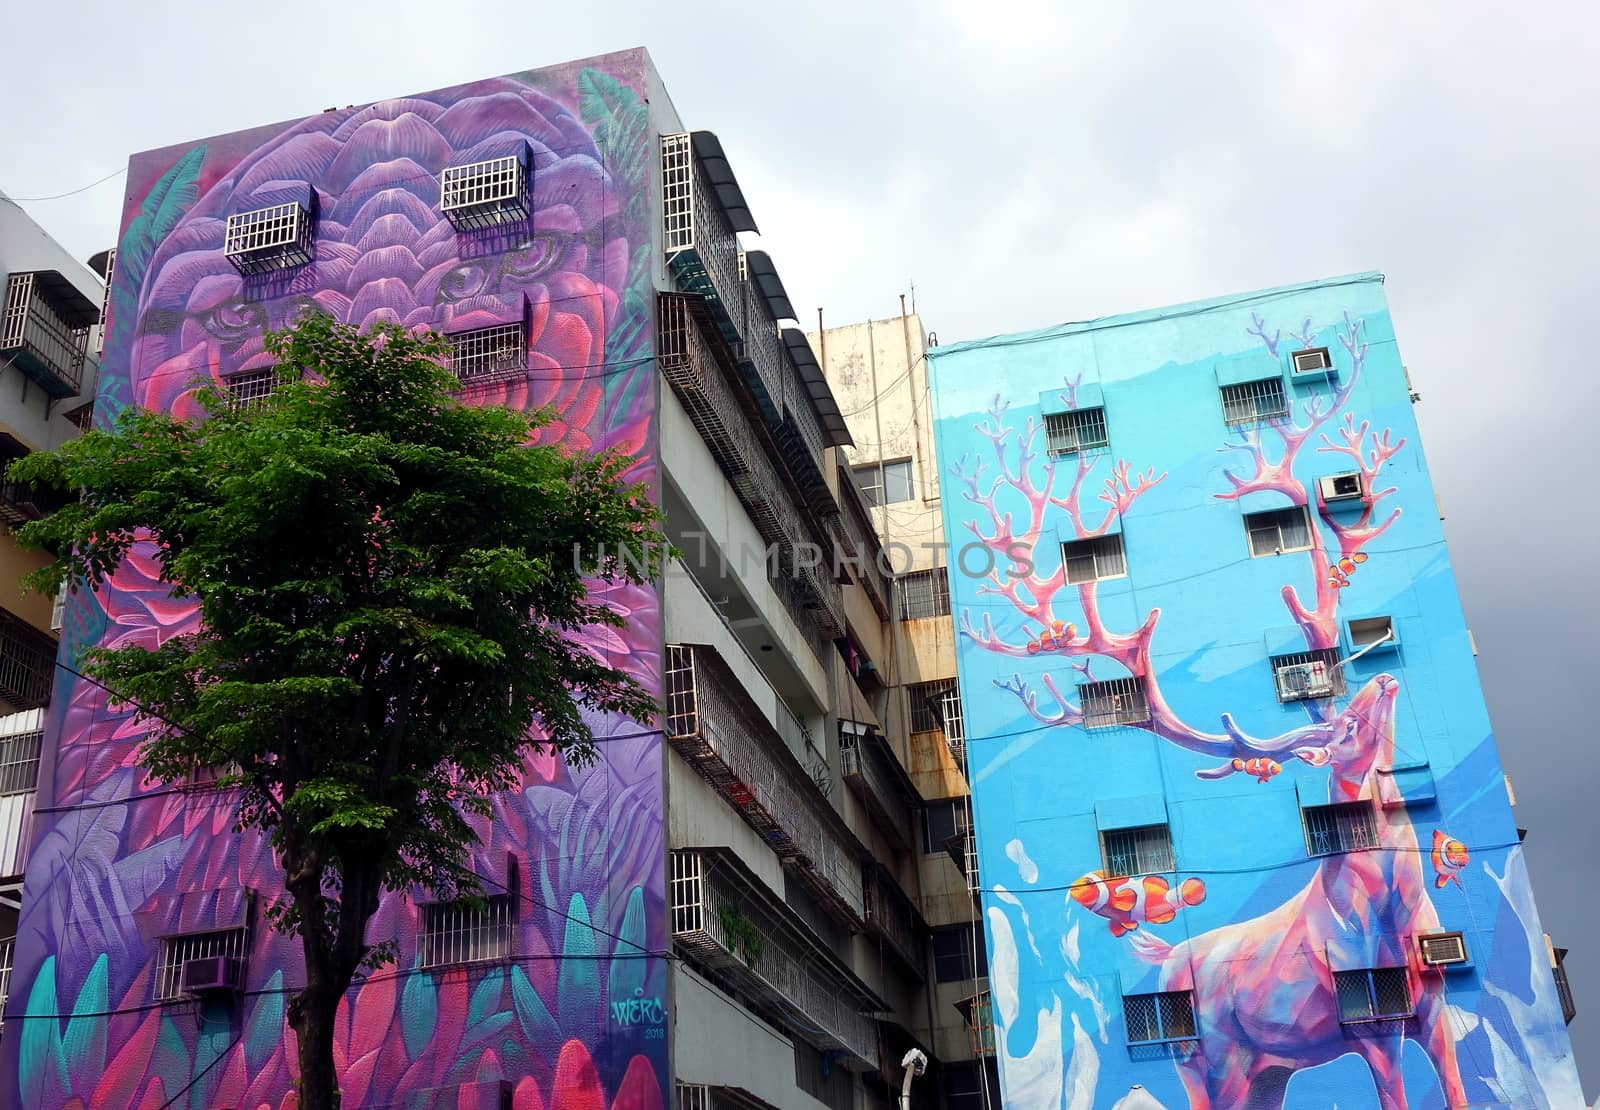 KAOHSIUNG, TAIWAN -- JULY 14, 2018: Giant paintings on old housing facades that are part of the 2018 Street Art Festival.
